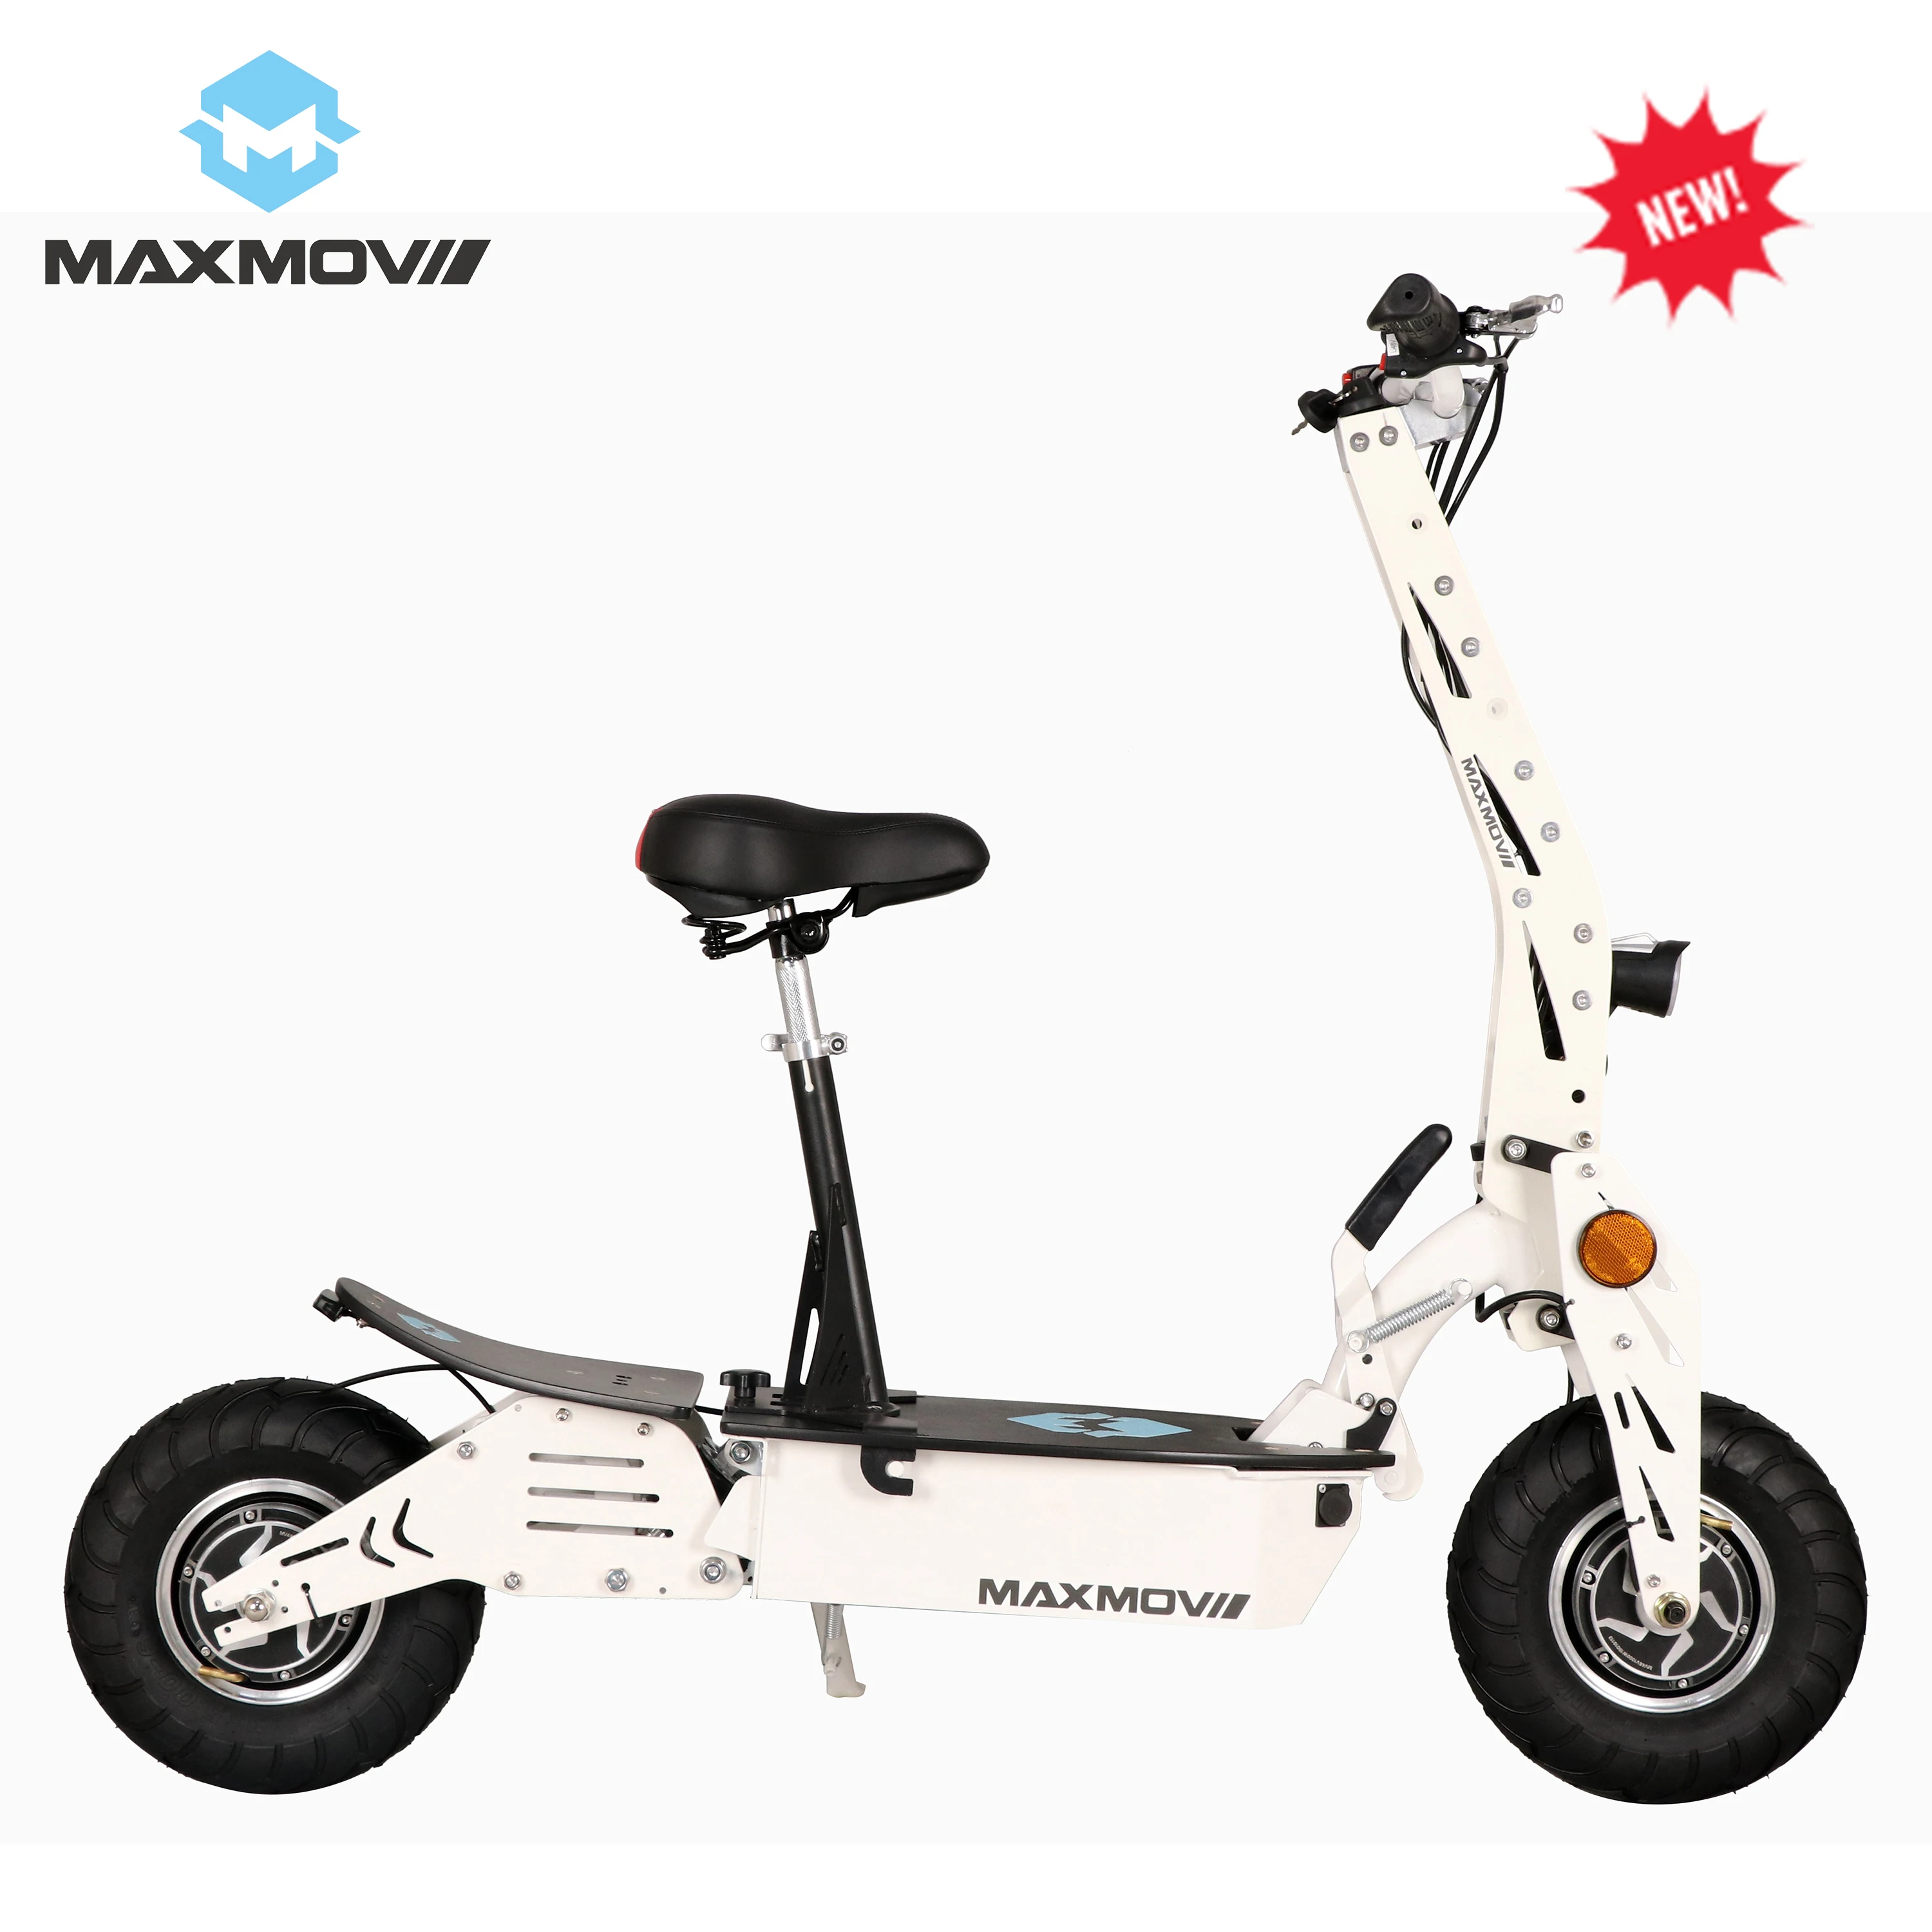 Top 2019 Top Seller 2000W 48V 20AH Lithium Battery Powerful Citycoco Electric Motorcycle Scooter with 50KM/h Max Speed 10